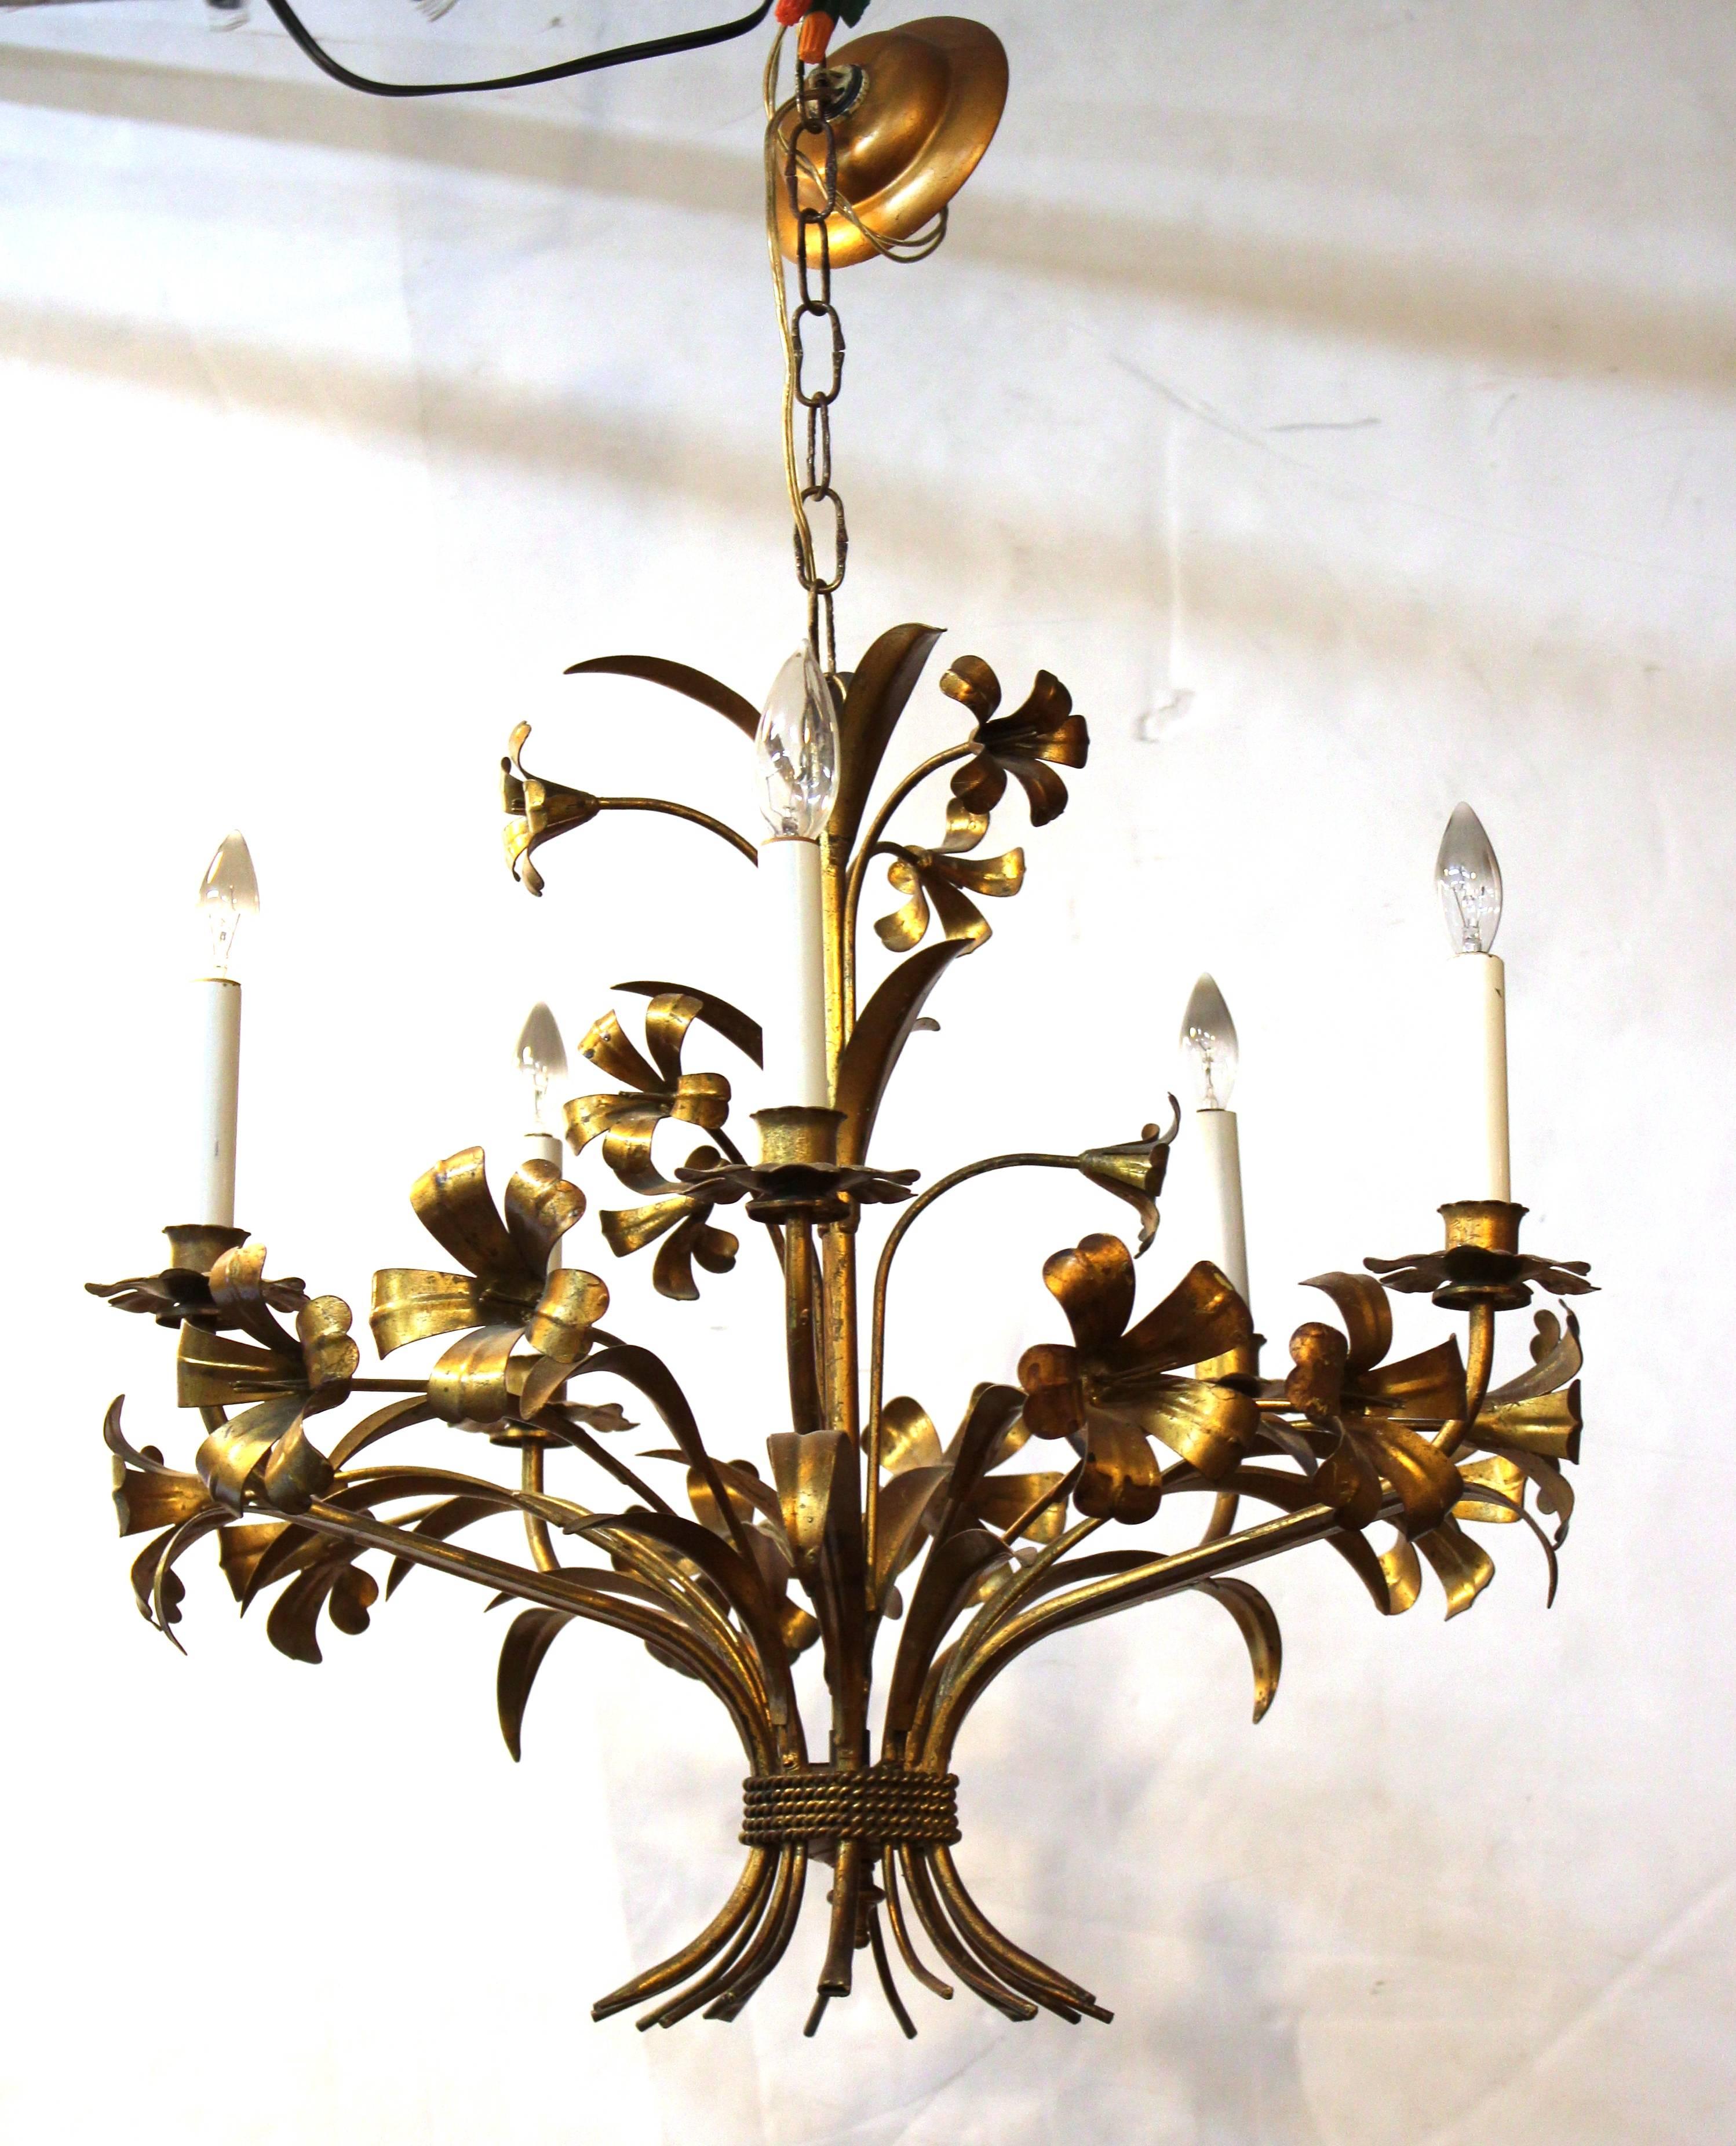 Mid-Century Modern Italian brass floral chandelier. The piece was made in Italy in the 1950s-1960s and is in good vintage condition.